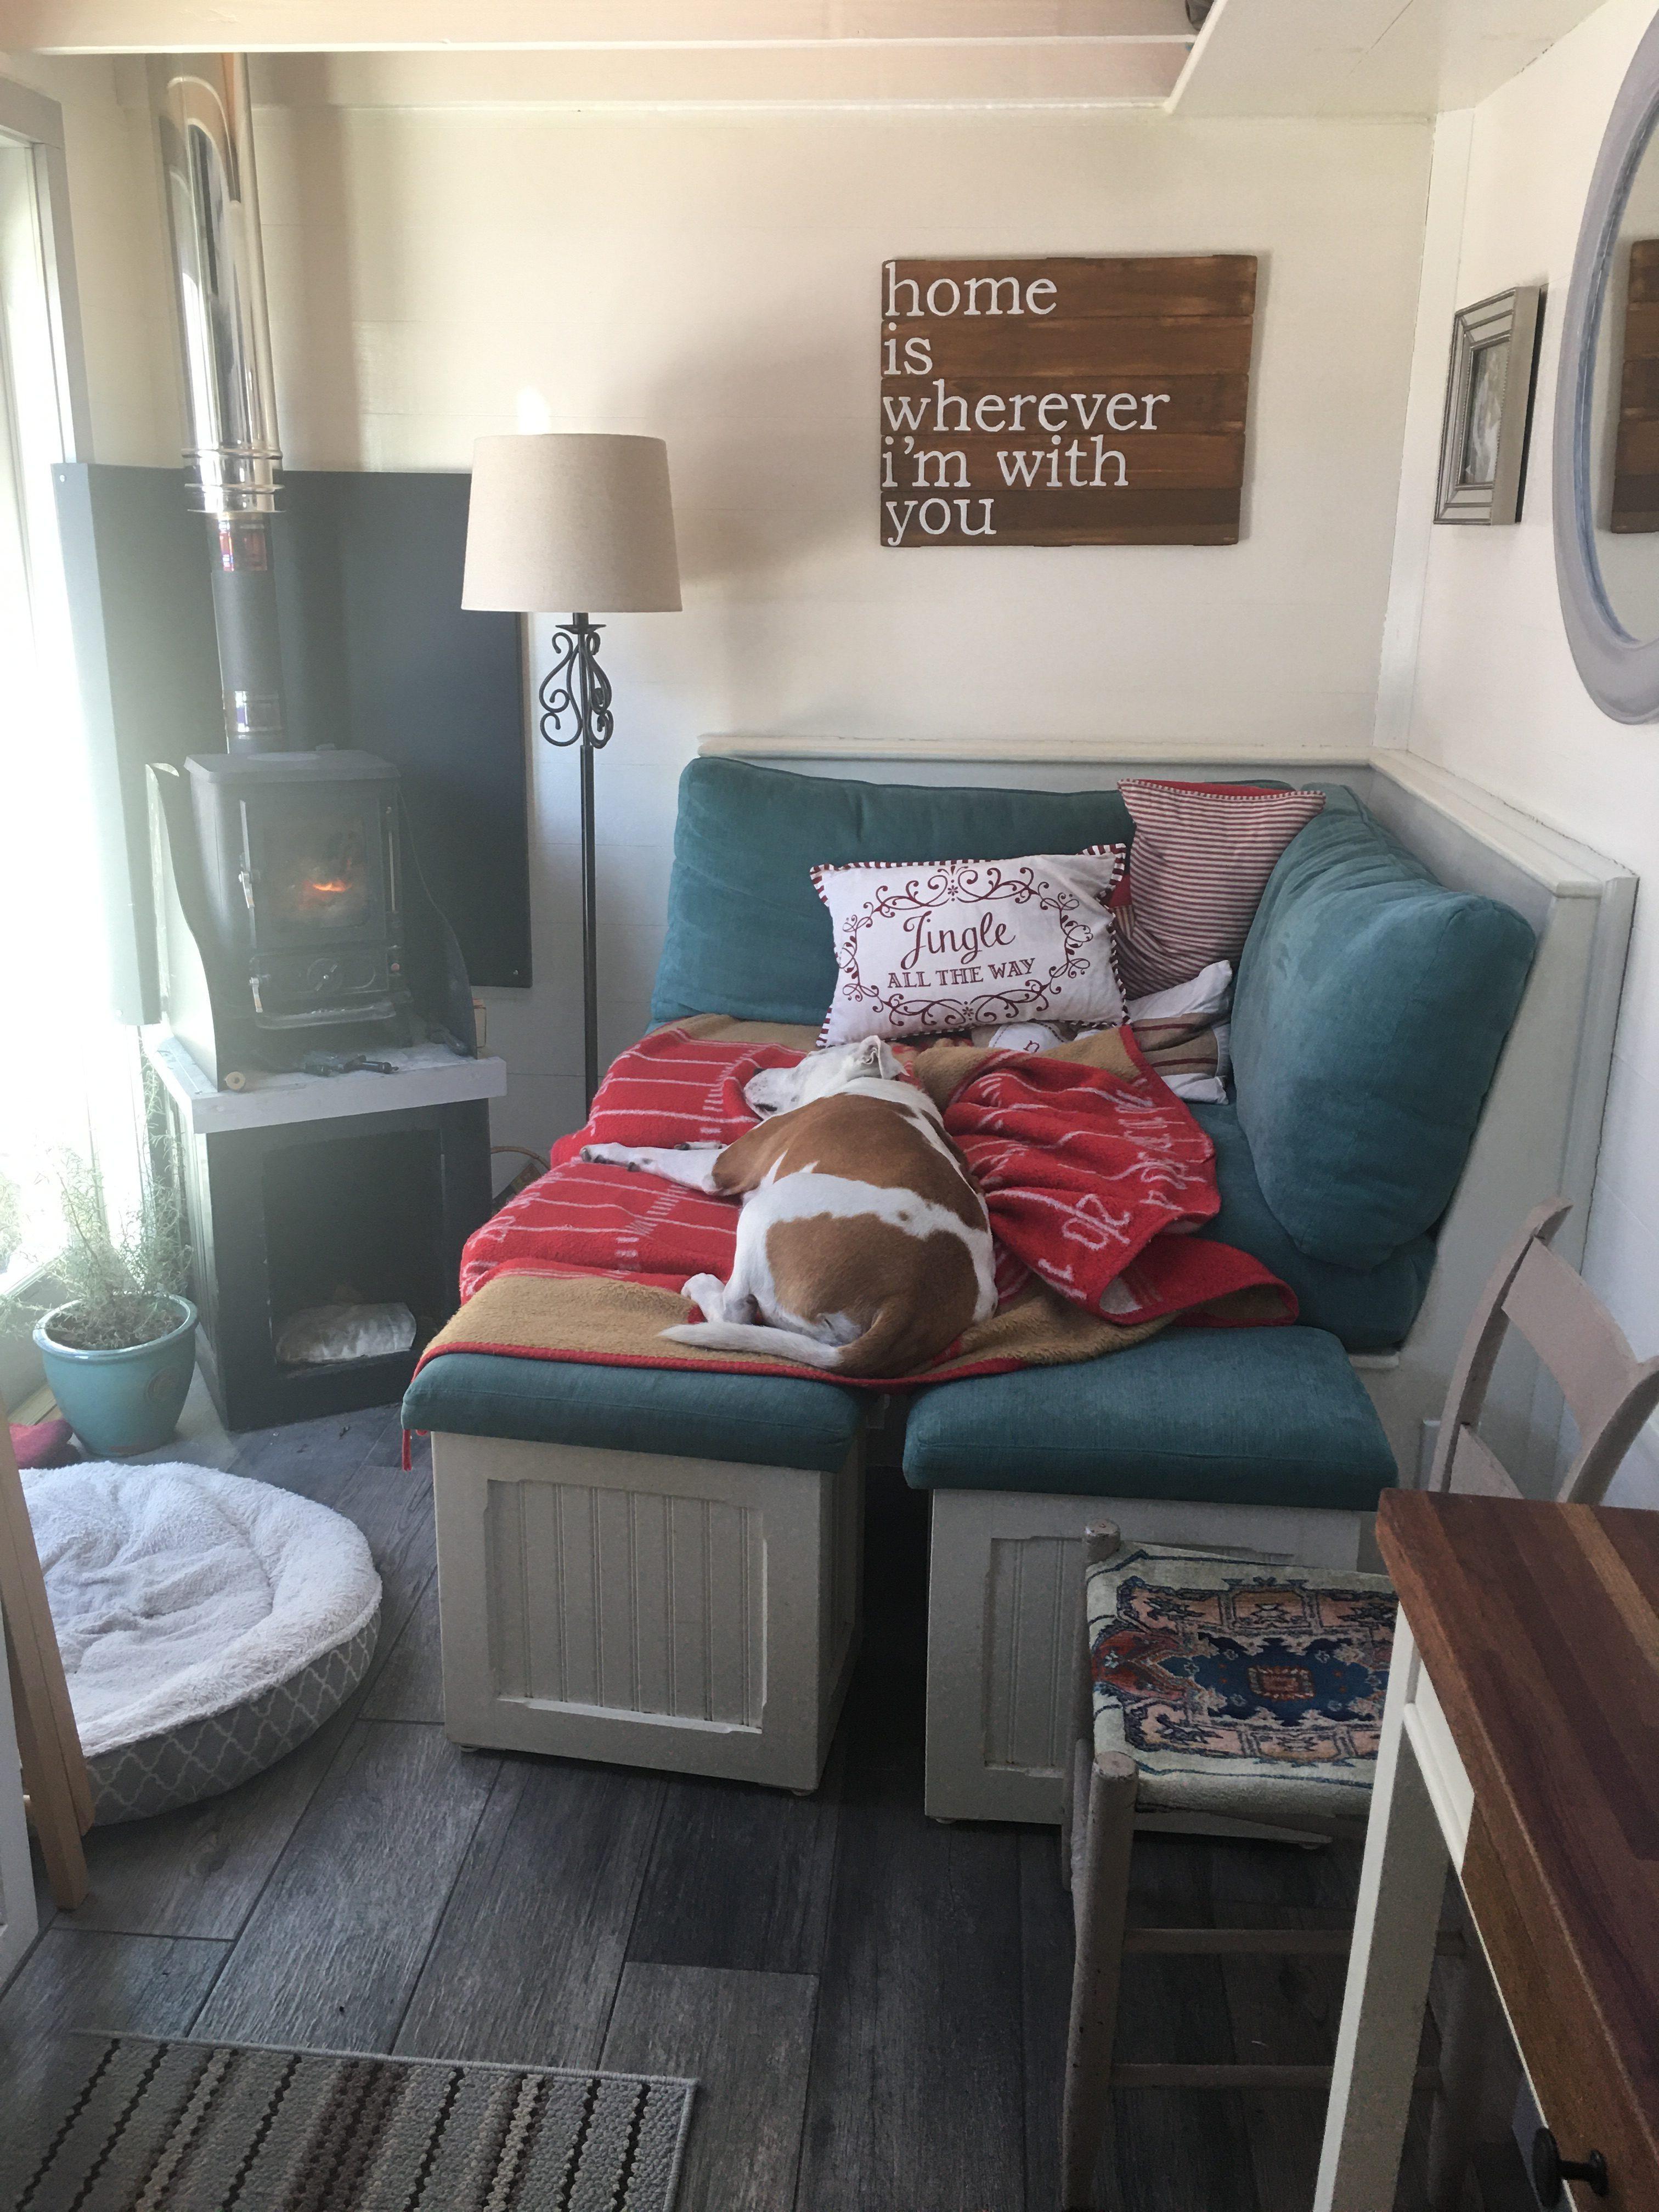 What It's Really Like Living In A Tiny House - Tiny House Living